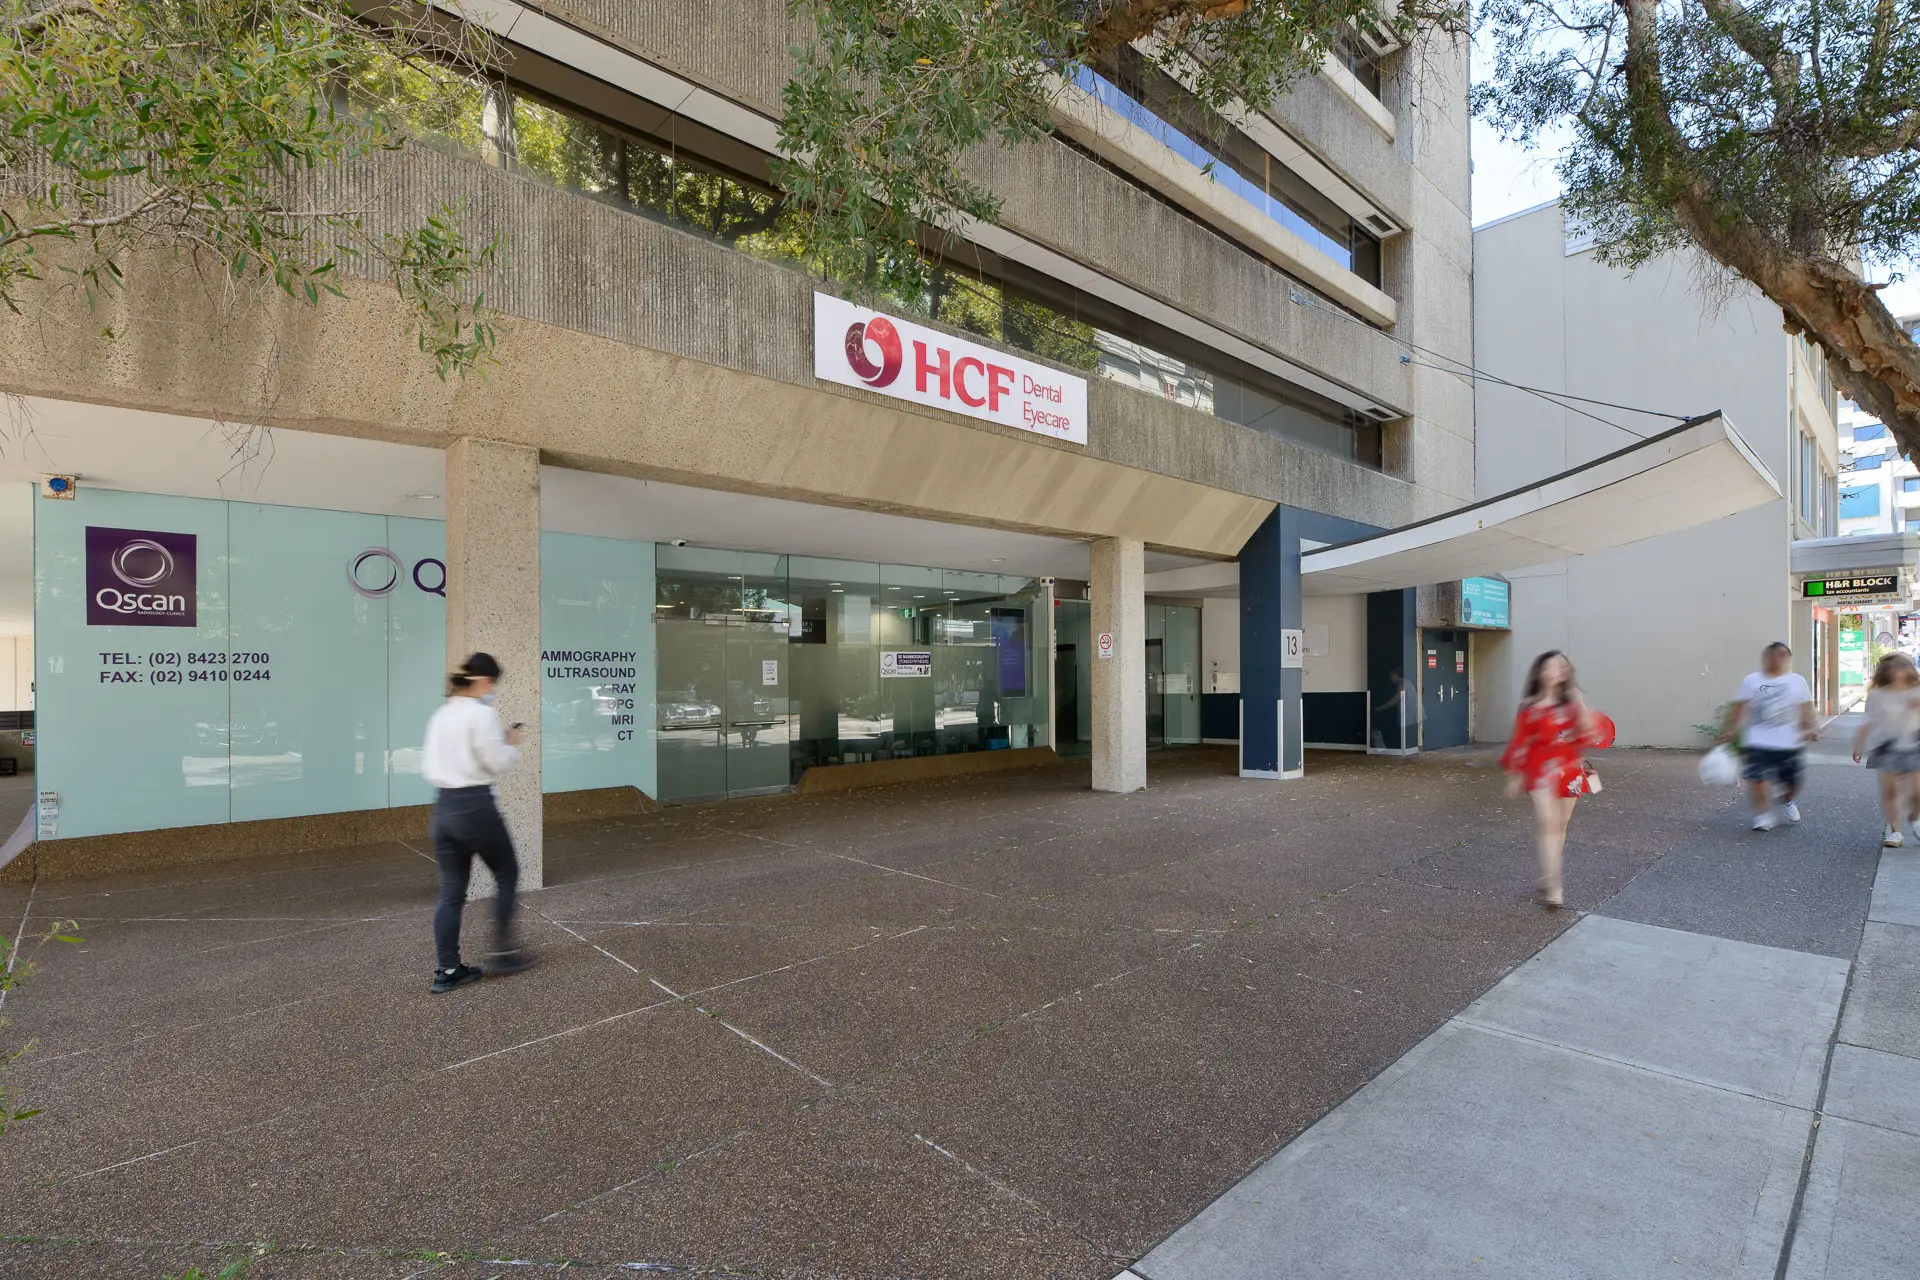 Level 7/13 Spring Street, Chatswood For Lease by Shead Property - image 1